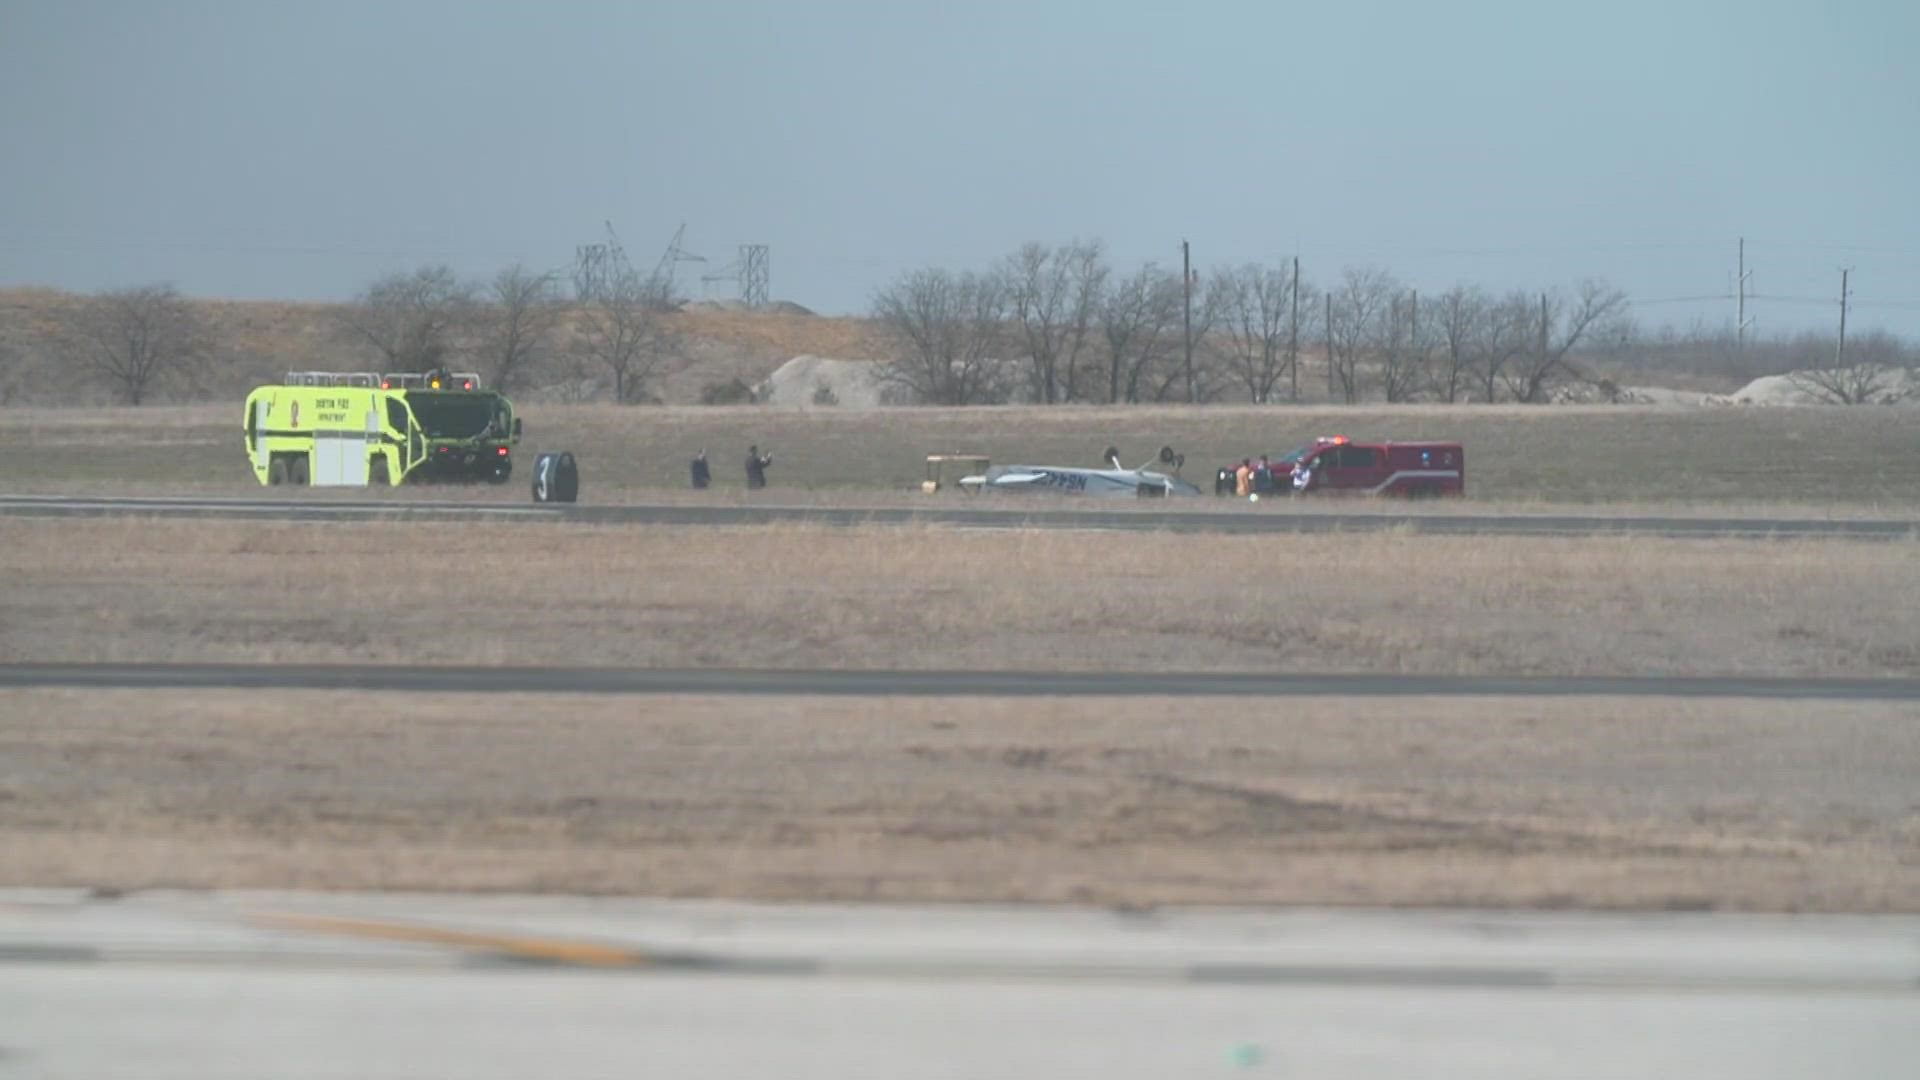 A pilot has been reported safe after their plane flipped over at Denton Enterprise Airport on Sunday afternoon.